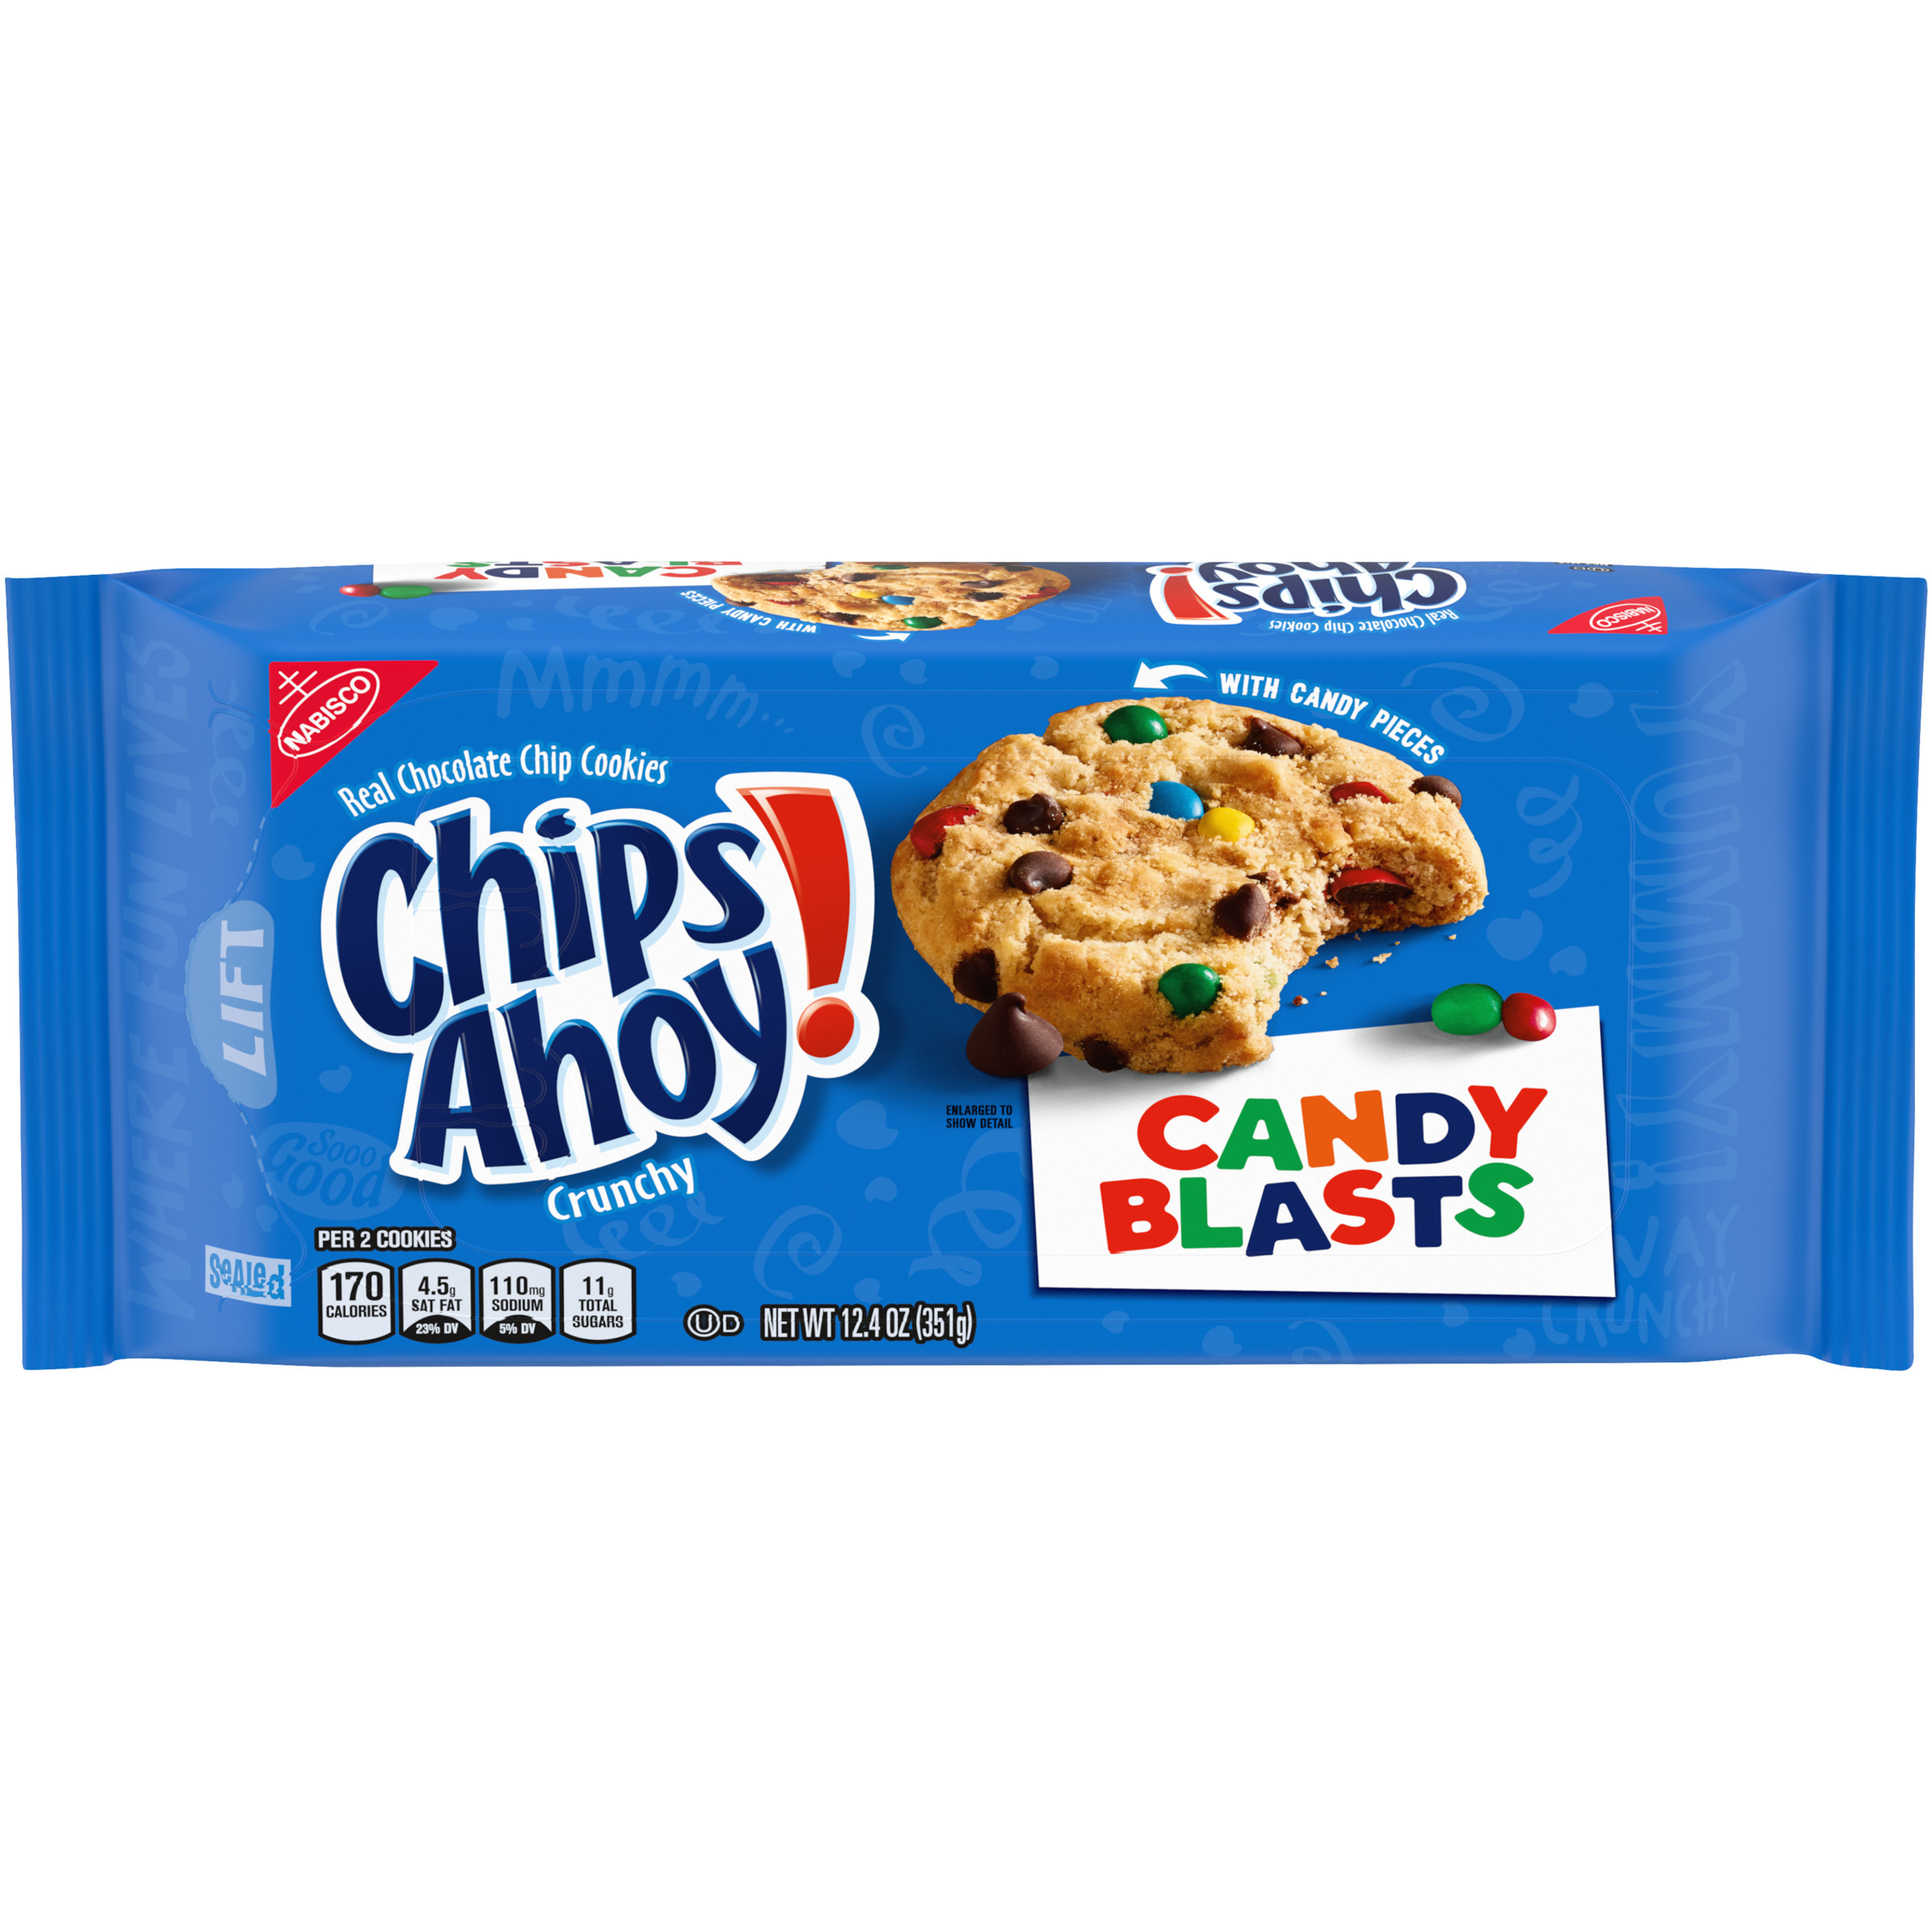 CHIPS AHOY! Candy Blasts Cookies, 12.4 oz-0